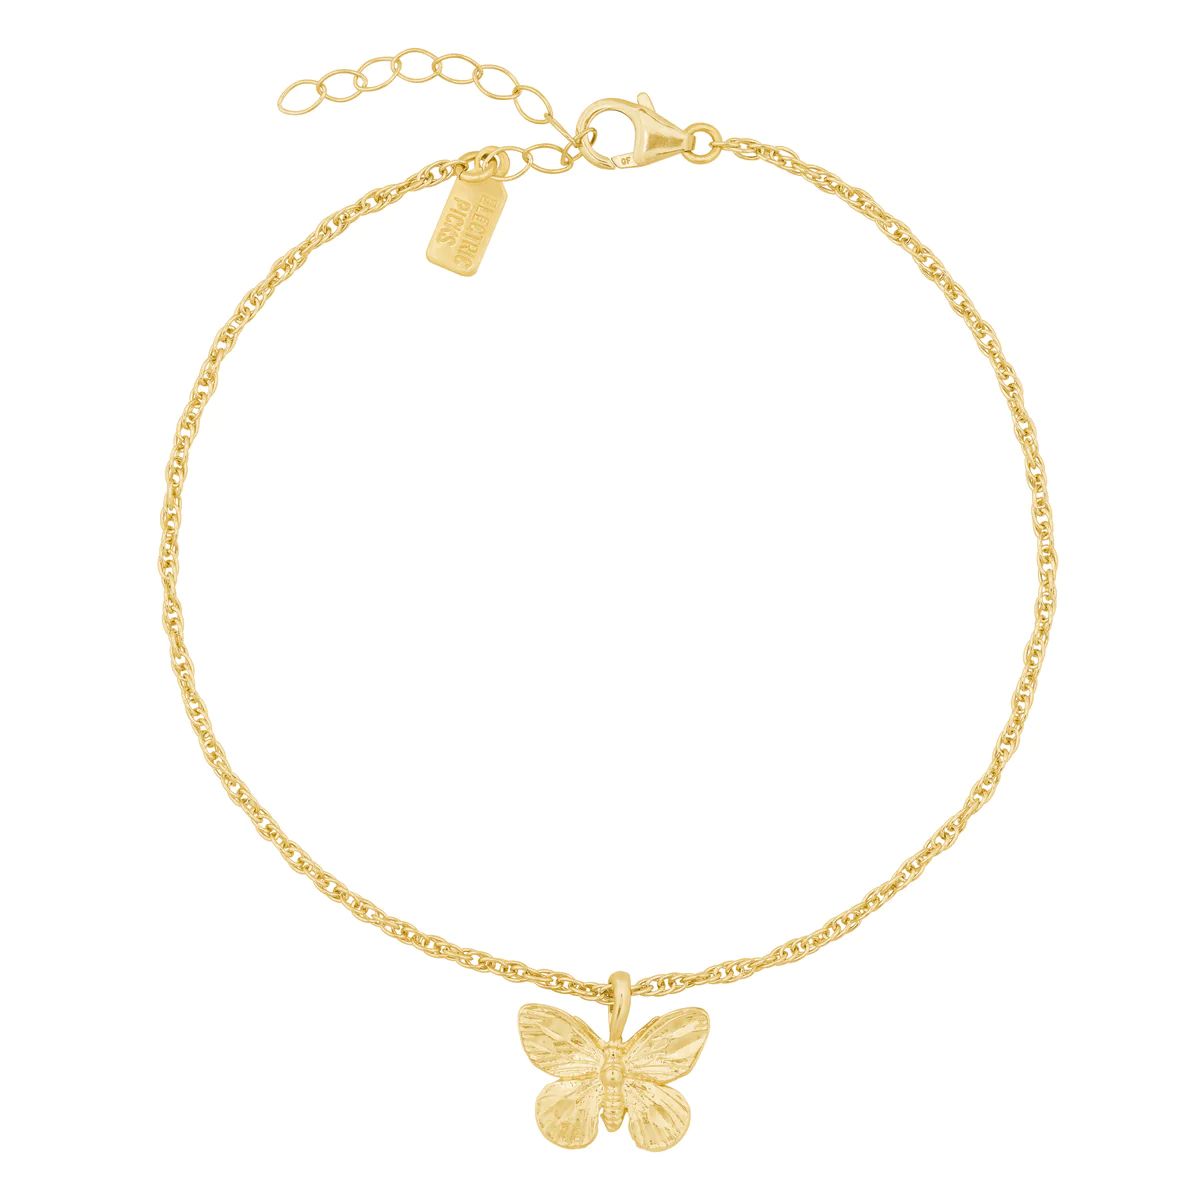 Flutter Anklet | Electric Picks Jewelry